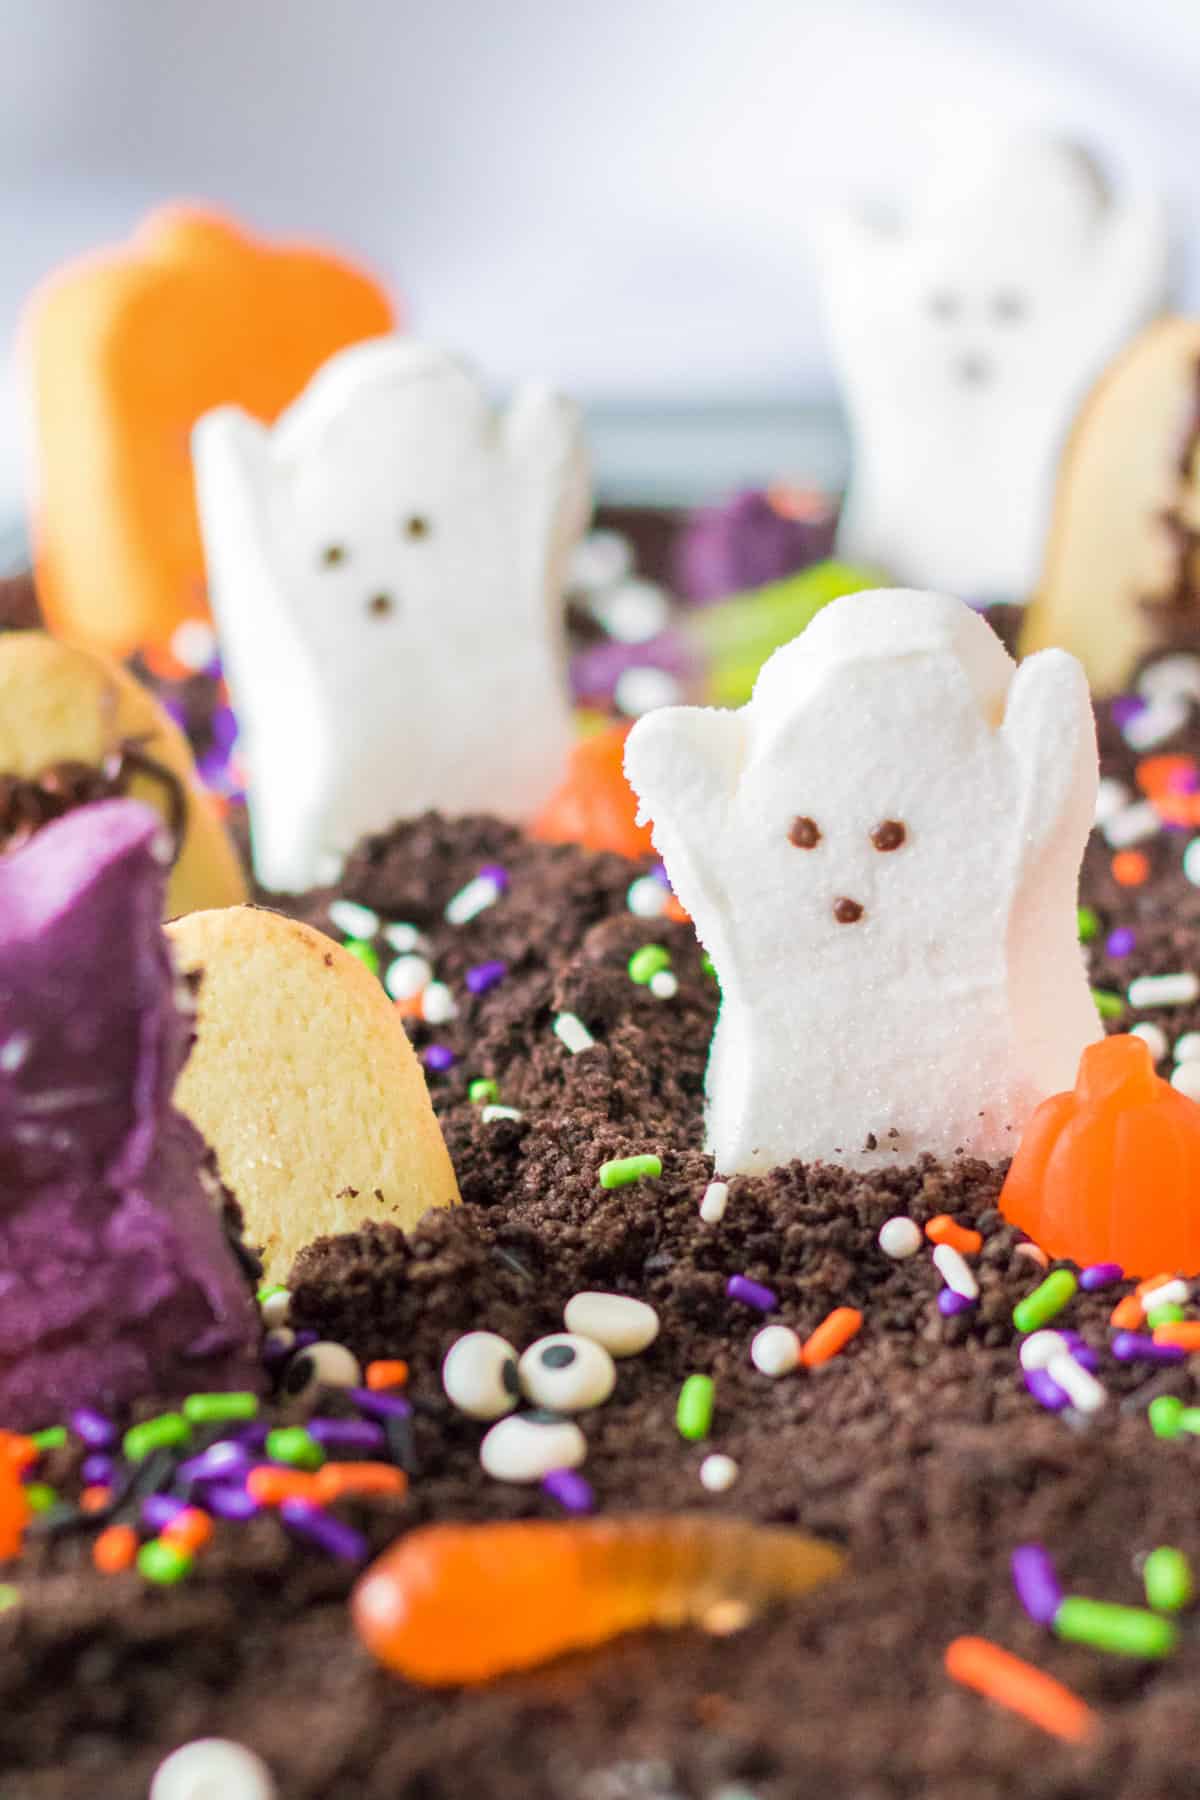 Cake covered with oreo cookie crumbs and topped with Halloween Peeps and other candies.